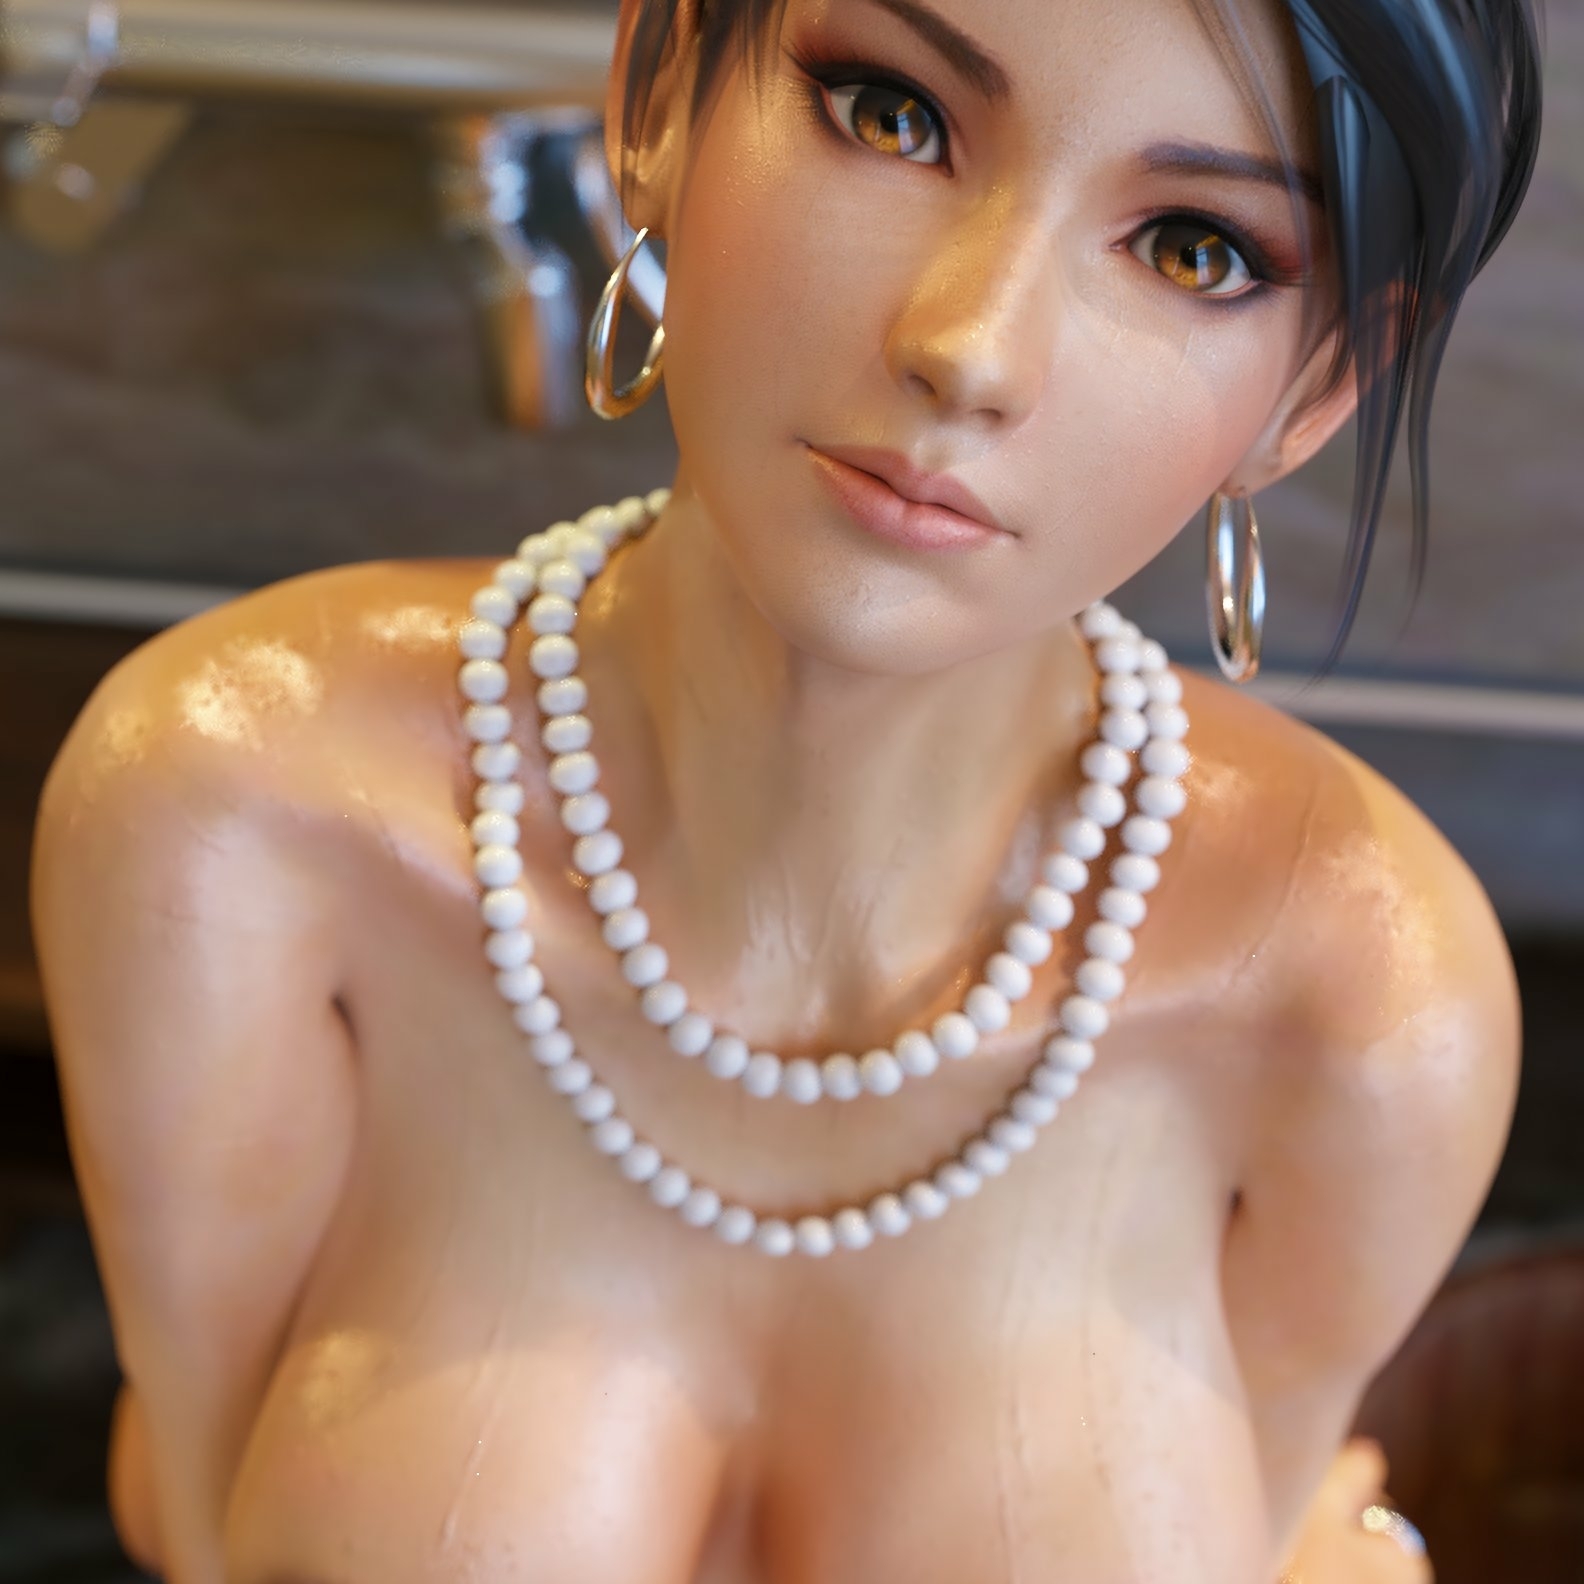 Momiji fluffy foam Dead Or Alive Momiji 3d Girl 3d Porn Sexy Natural Boobs Shower Nipples Naked Nude Looking At Viewer Shy 3